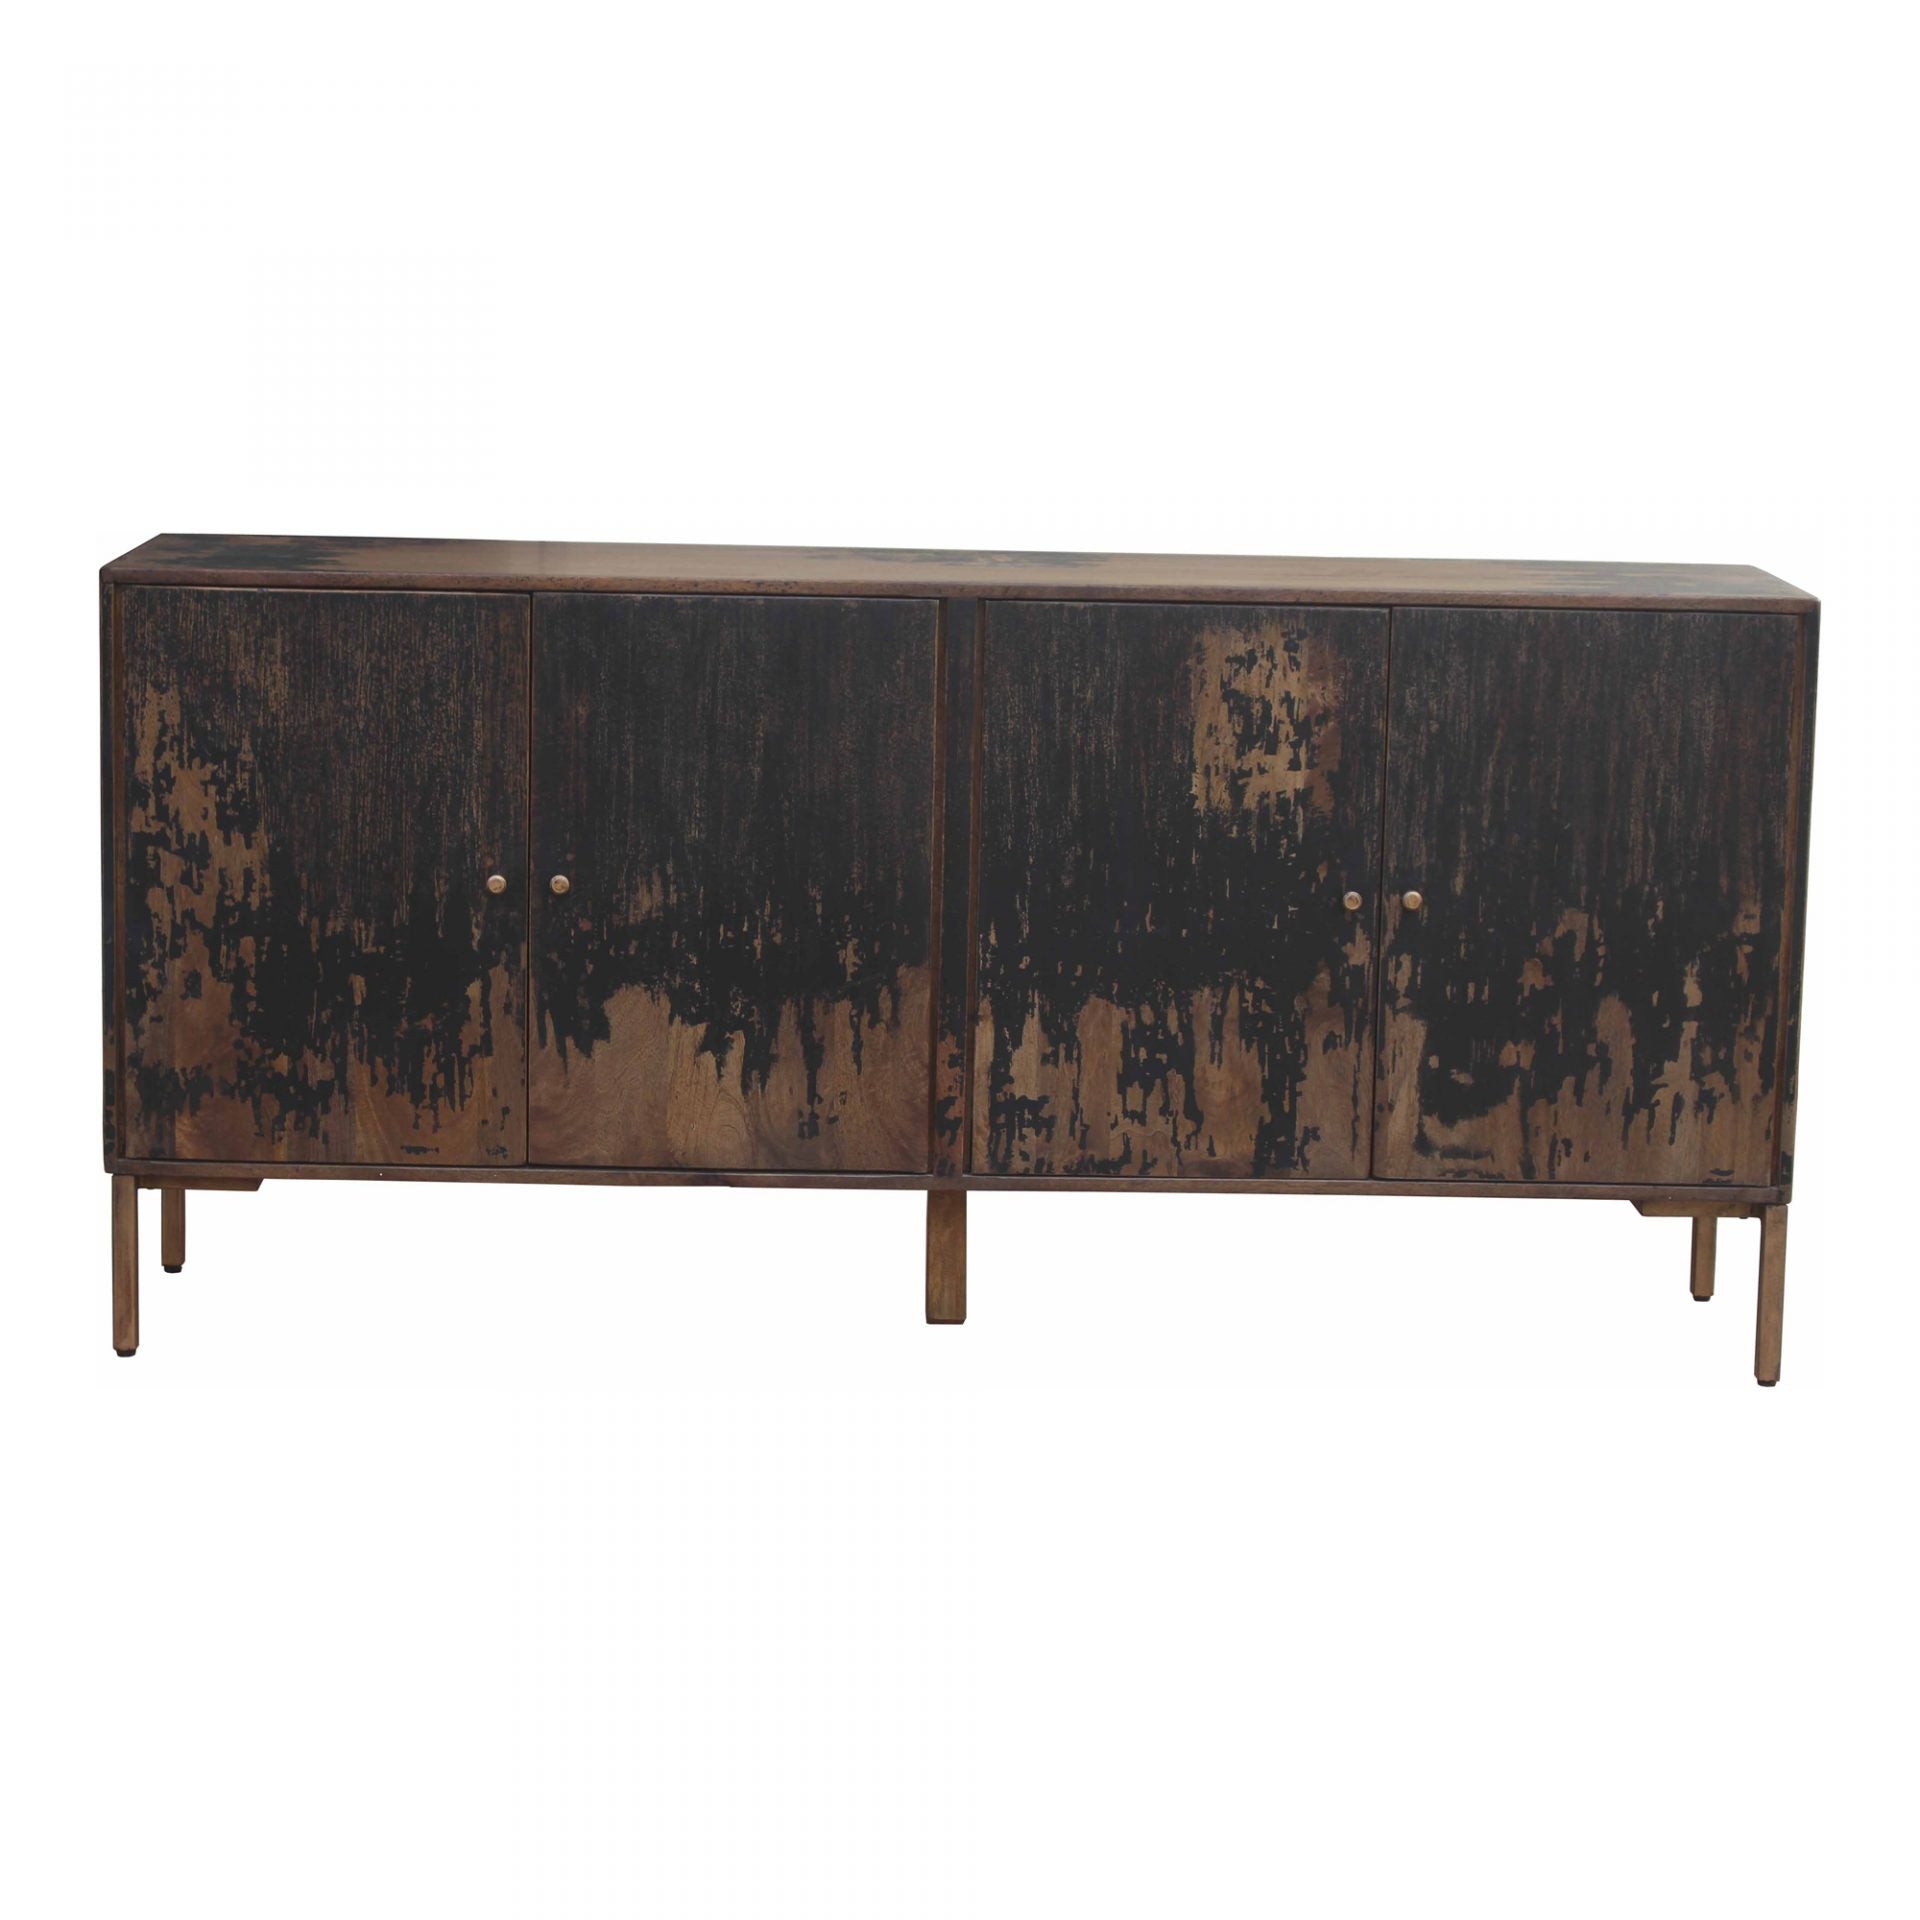 The rustic look to this Artists Sideboard is extremely versatile, fitting both the industrial and farmhouse aesthetics. The golden knobs open to shelves, perfect for those families needing extra storage.   Size: 71"W x 16"D x 33.5"H Material: Solid Mango, Iron Legs